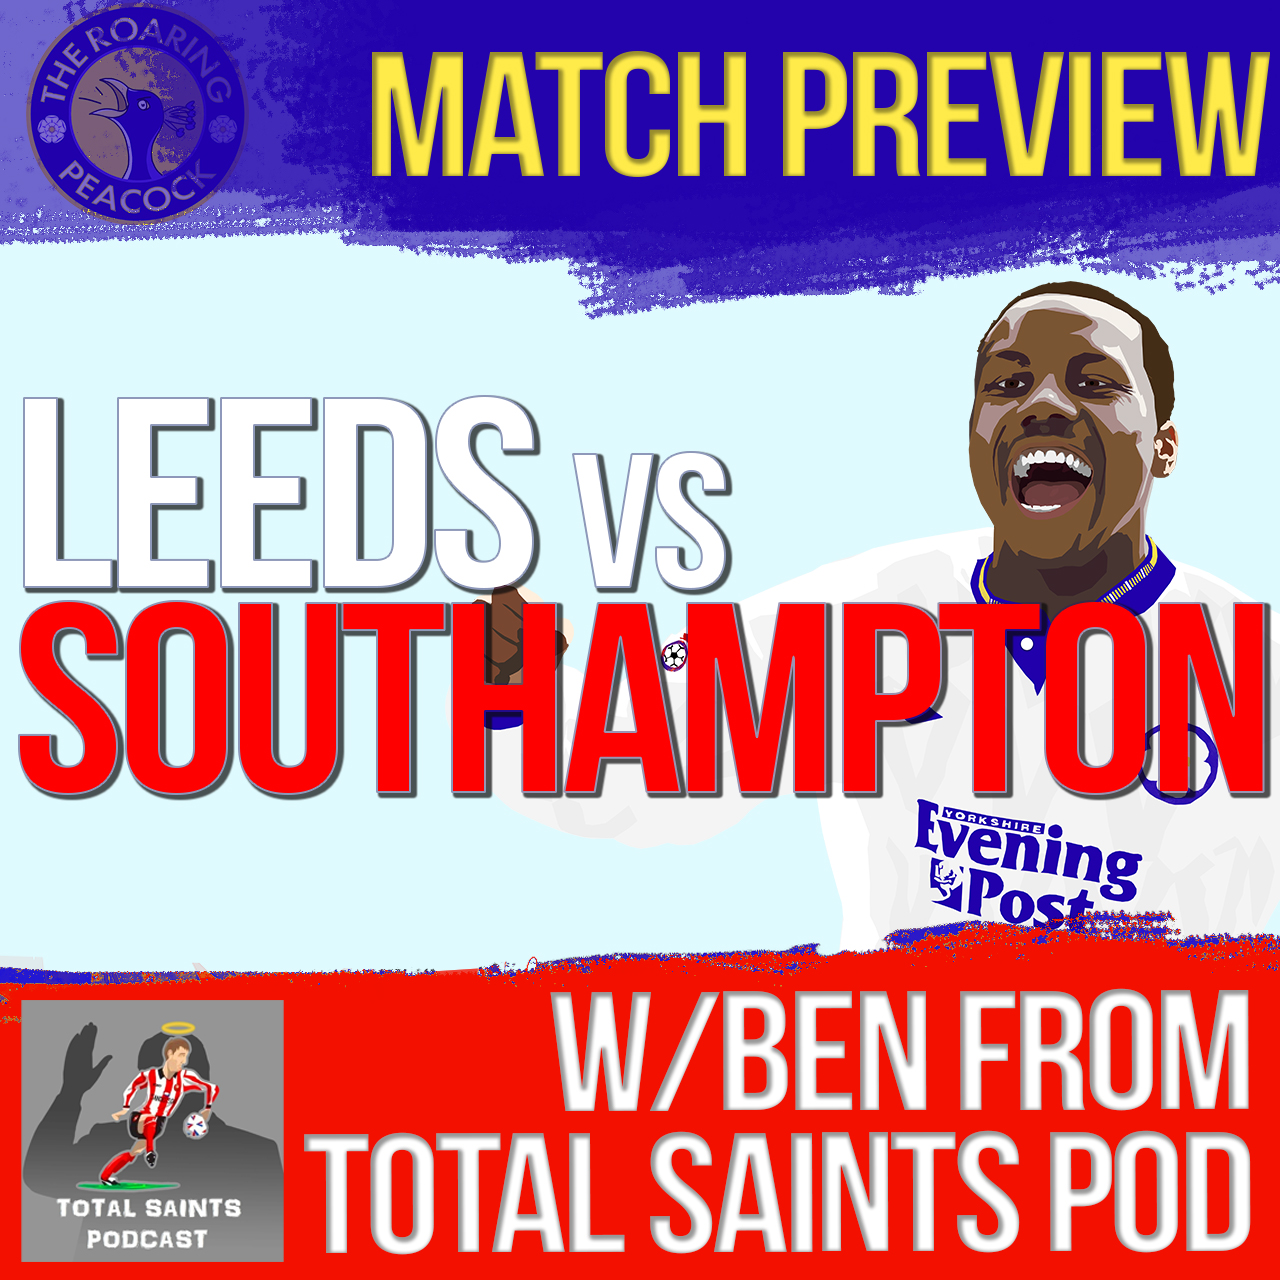 Leeds vs Southampton | Match Preview Feat. Ben from Total Saints Podcast